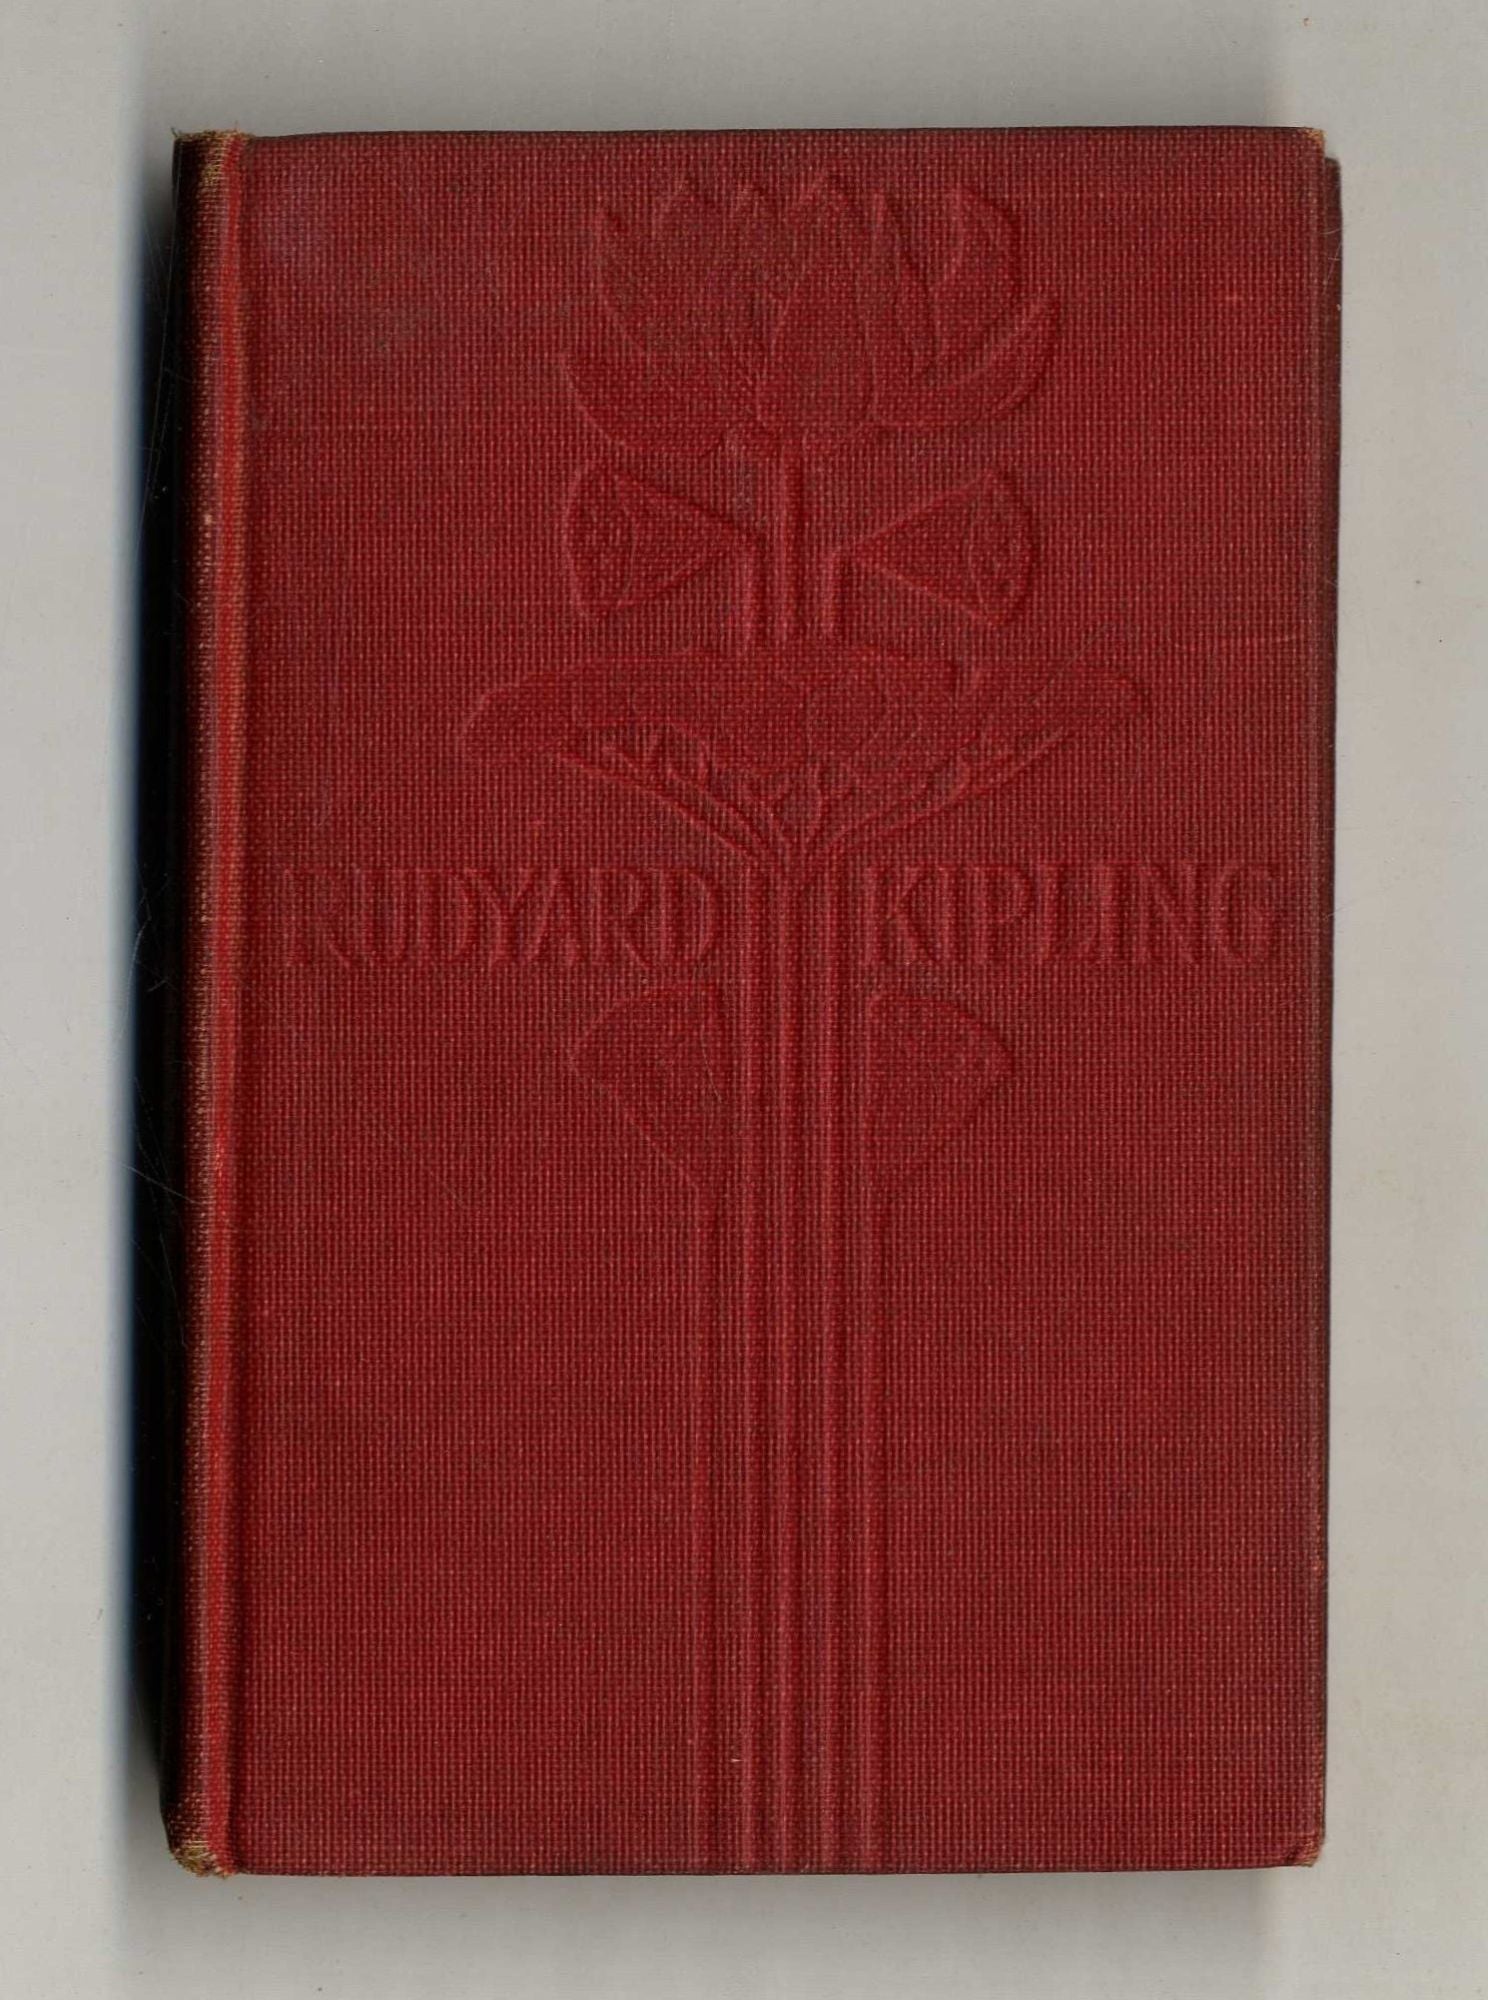 Book #160153 Soldiers Three: a Collection of Stories. Rudyard Kipling.